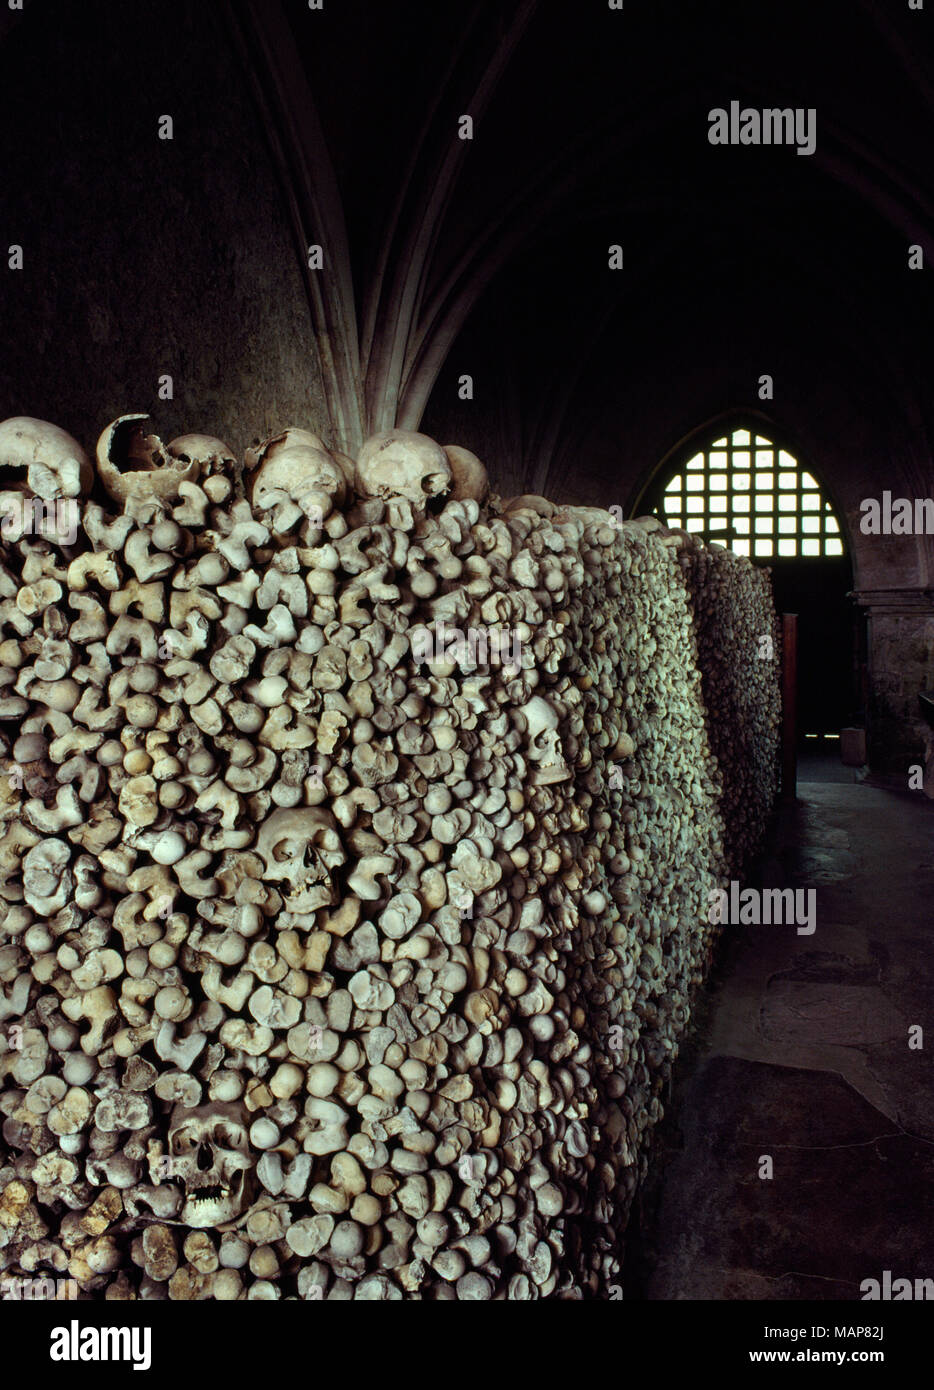 Part of the collection of human thigh bones & skulls representing some 2000 individuals stacked in the Crypt of St Leonard's Church, Hythe, Kent. Stock Photo